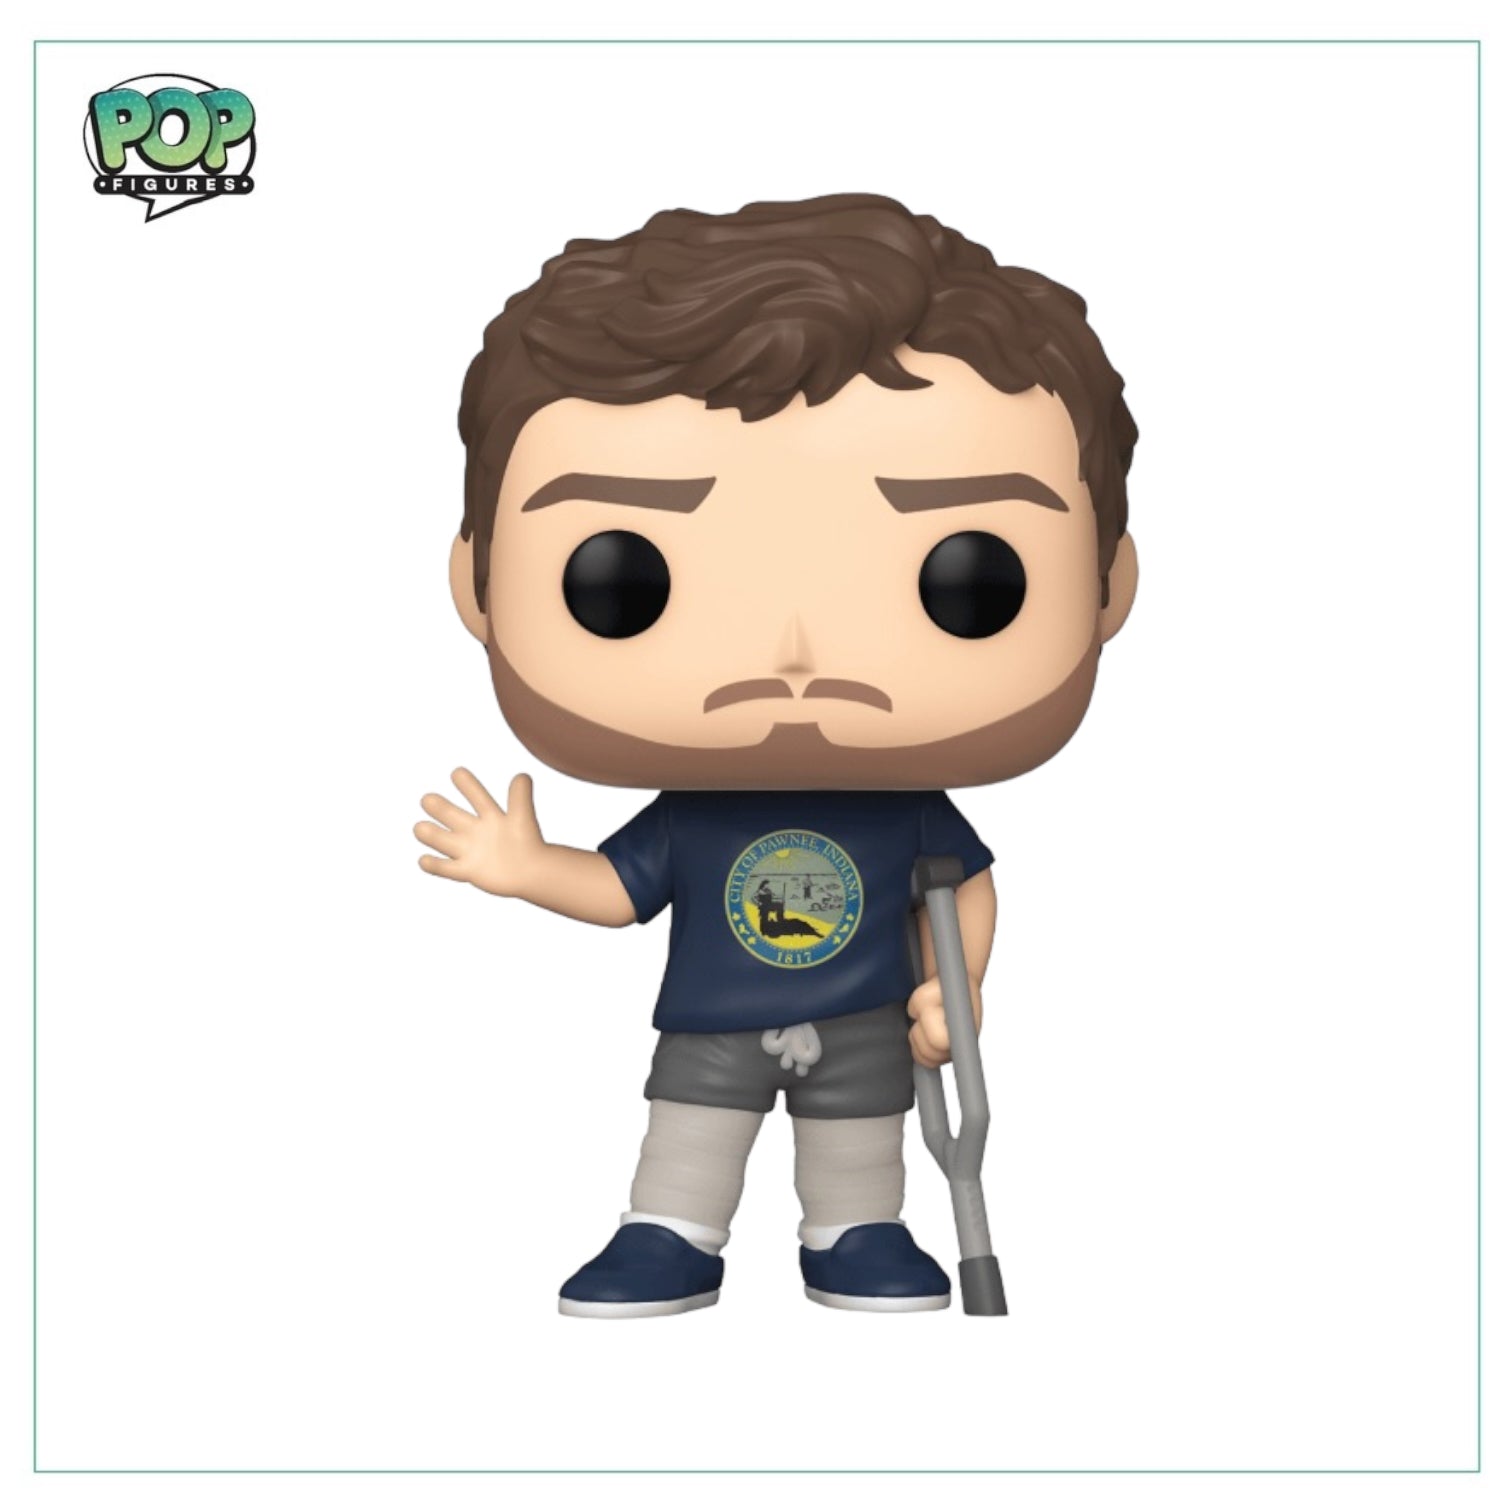 Andy with Leg Casts #1155 Funko Pop! Parks and Recreation - GO Exclusive